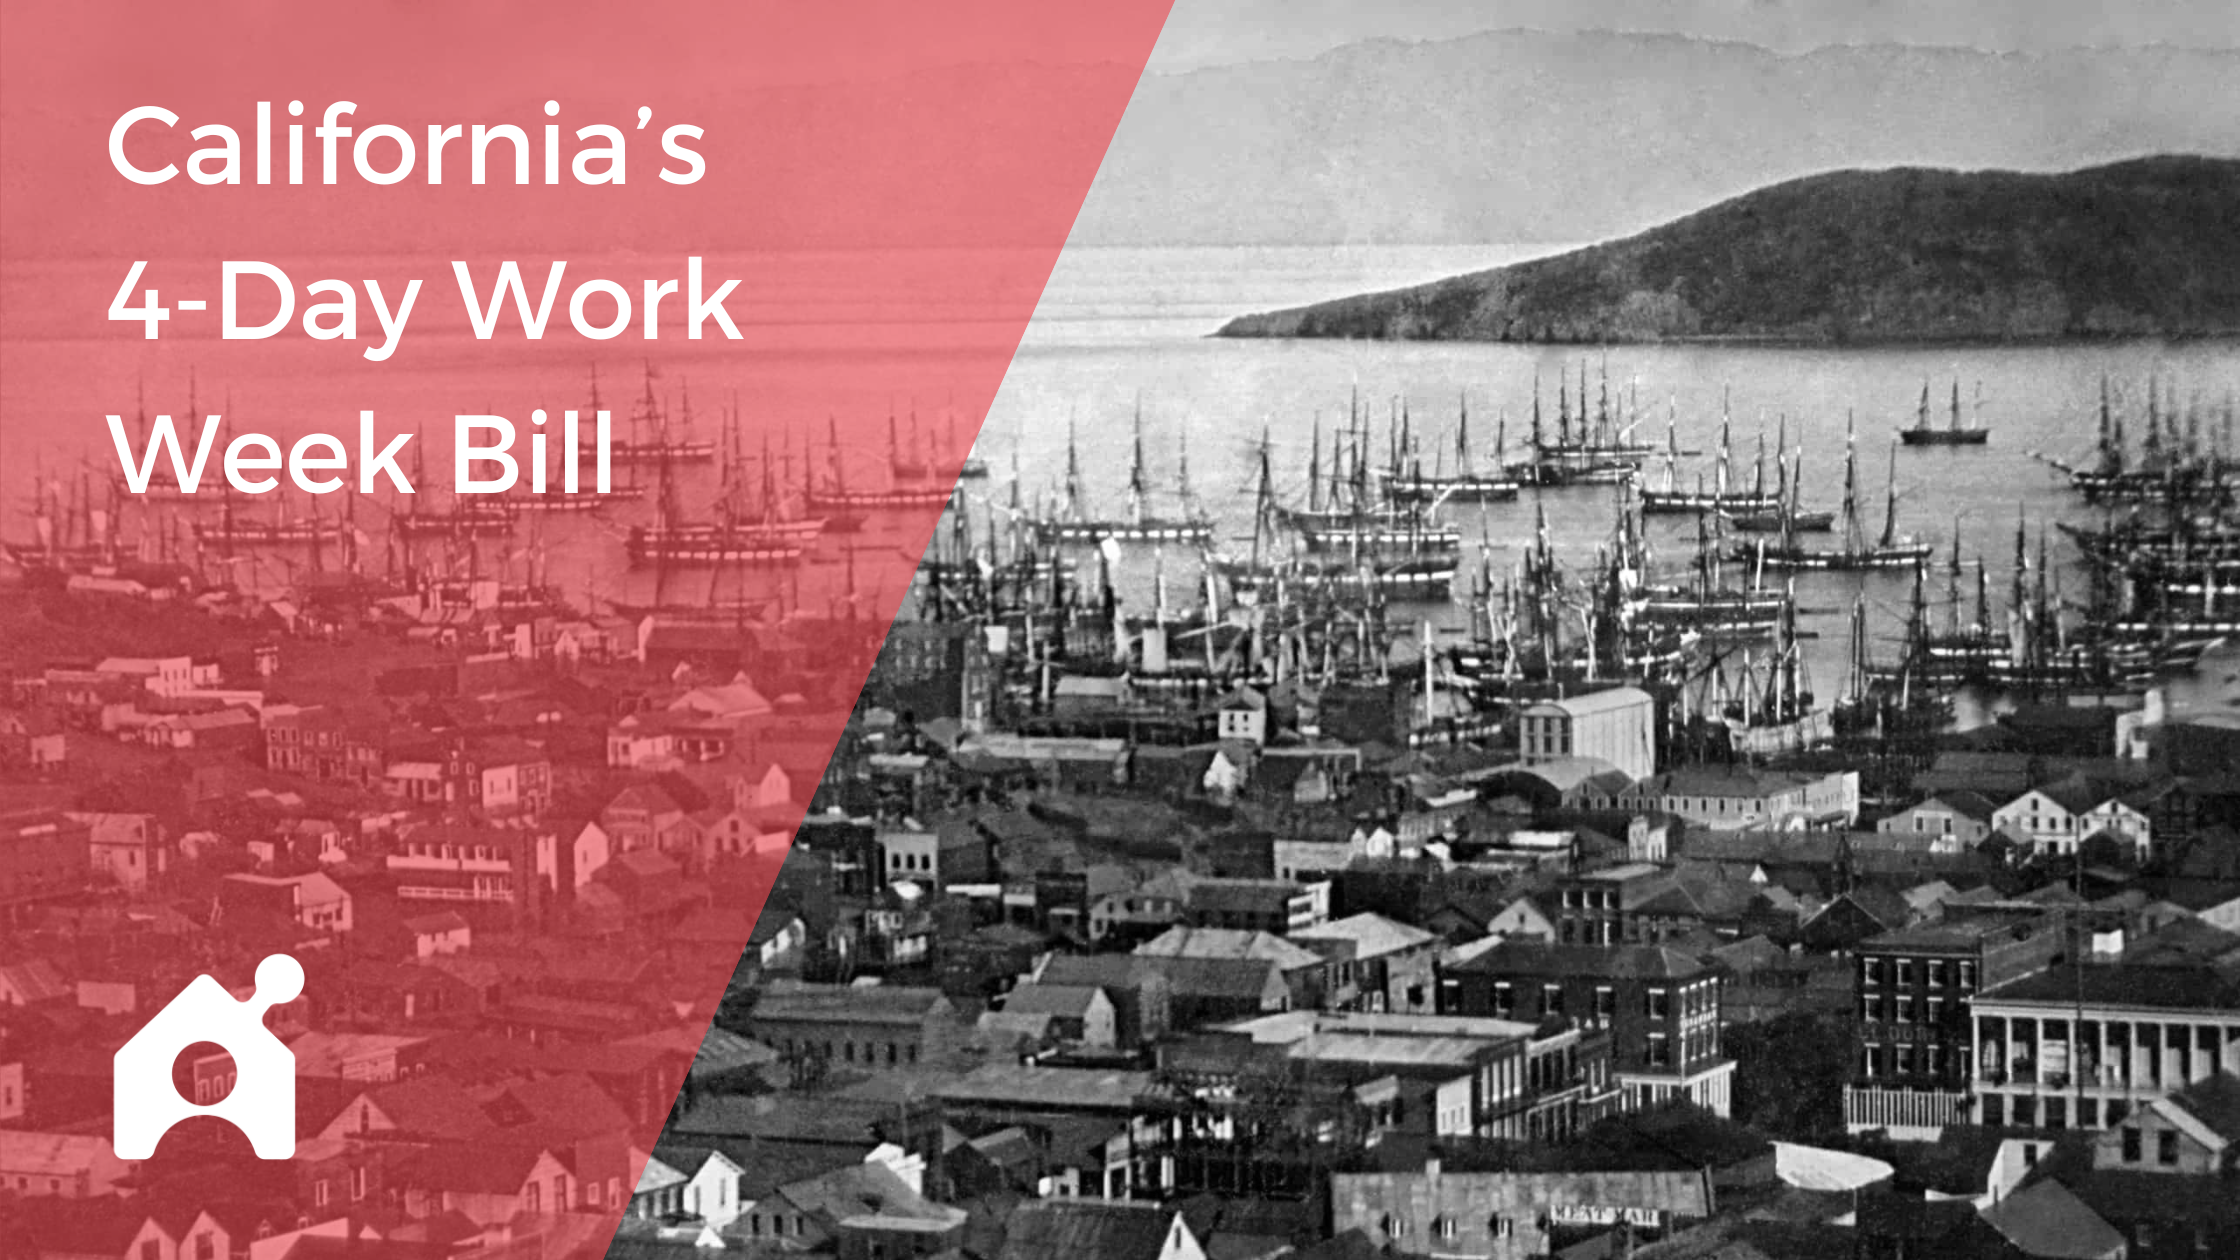 California’s 4-Day Work Week Bill: What Happened To It?